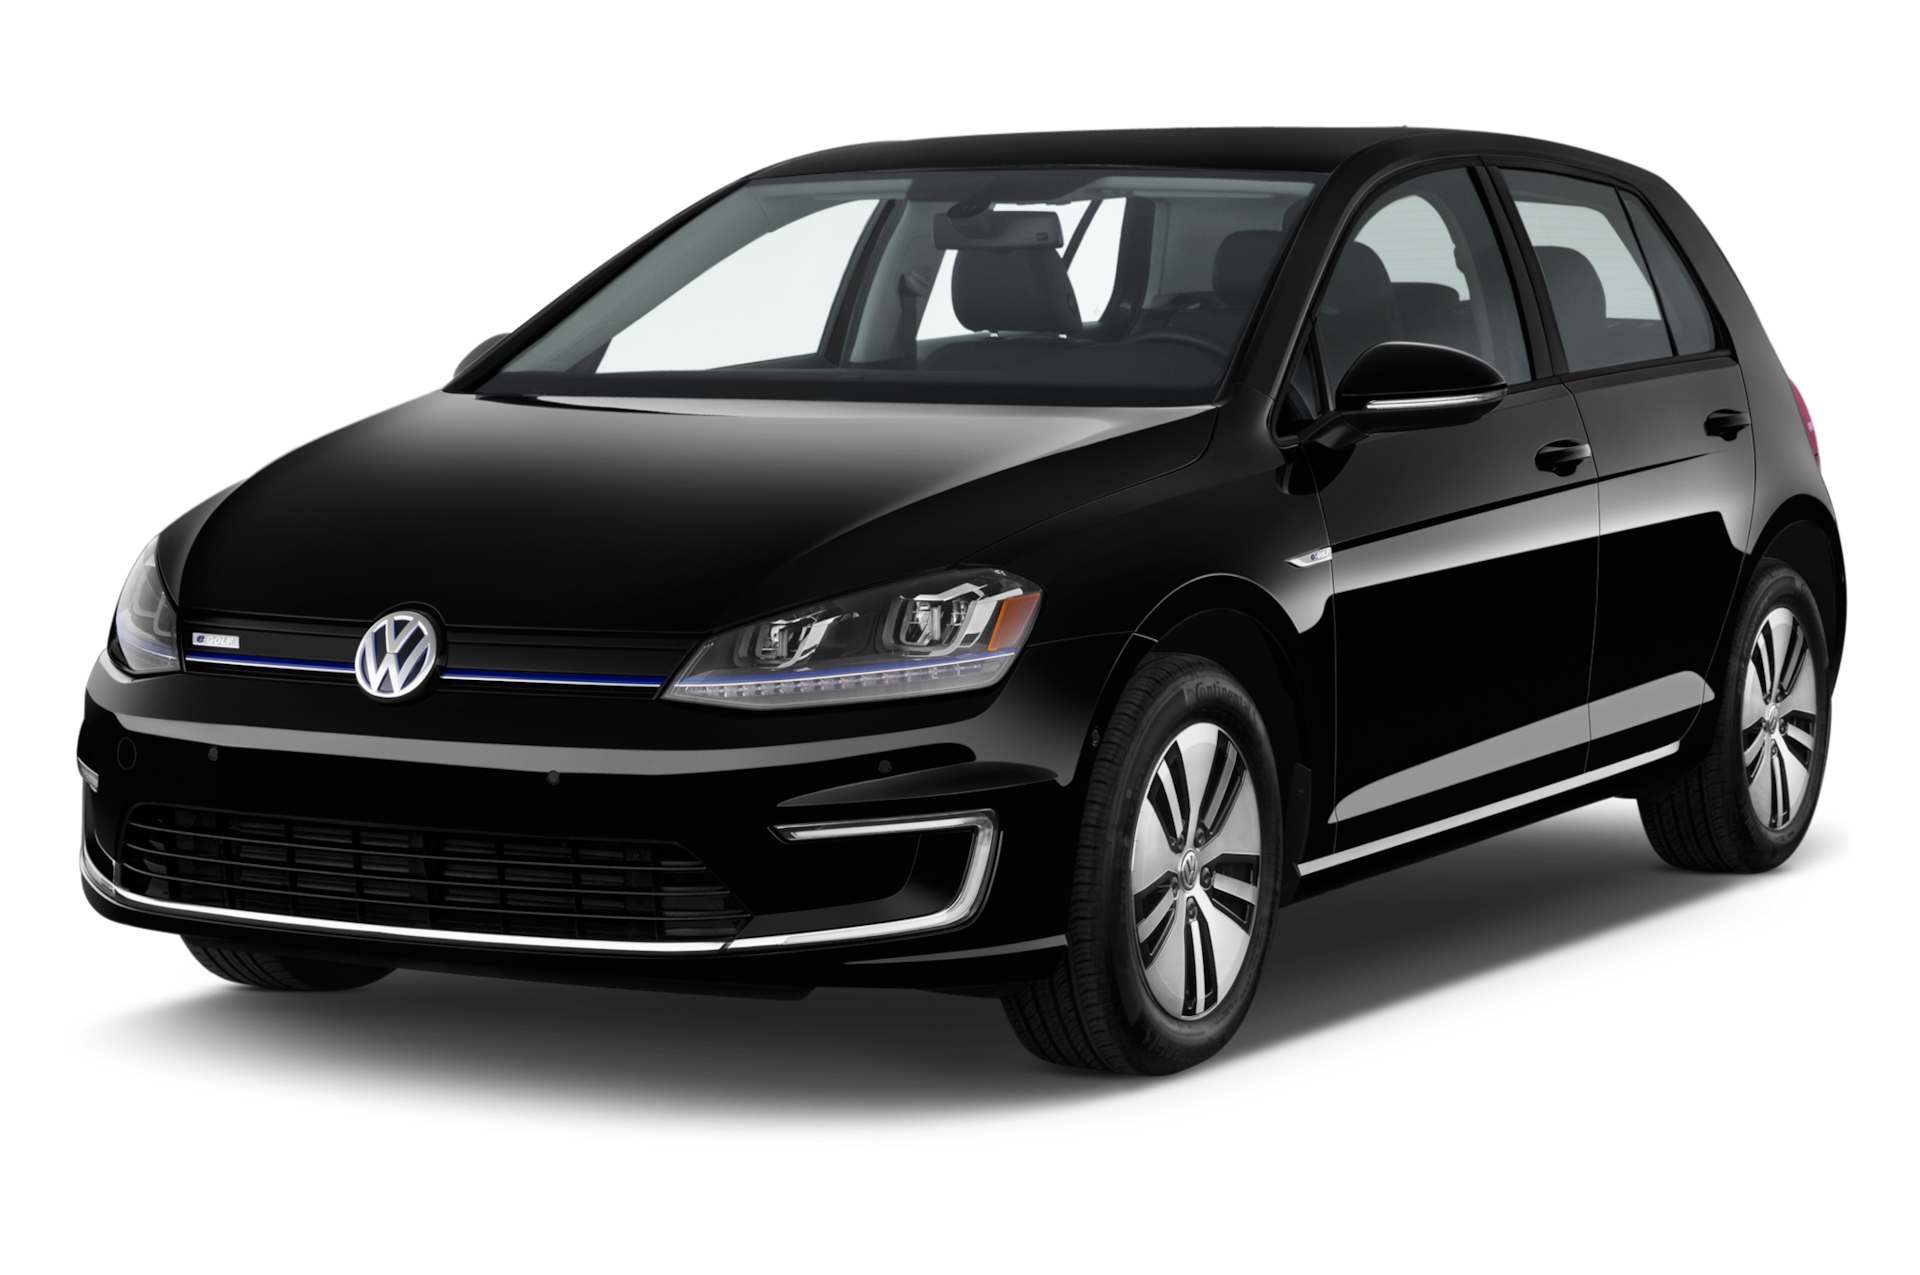 2015 Volkswagen E-Golf Prices, Reviews, and Photos - MotorTrend